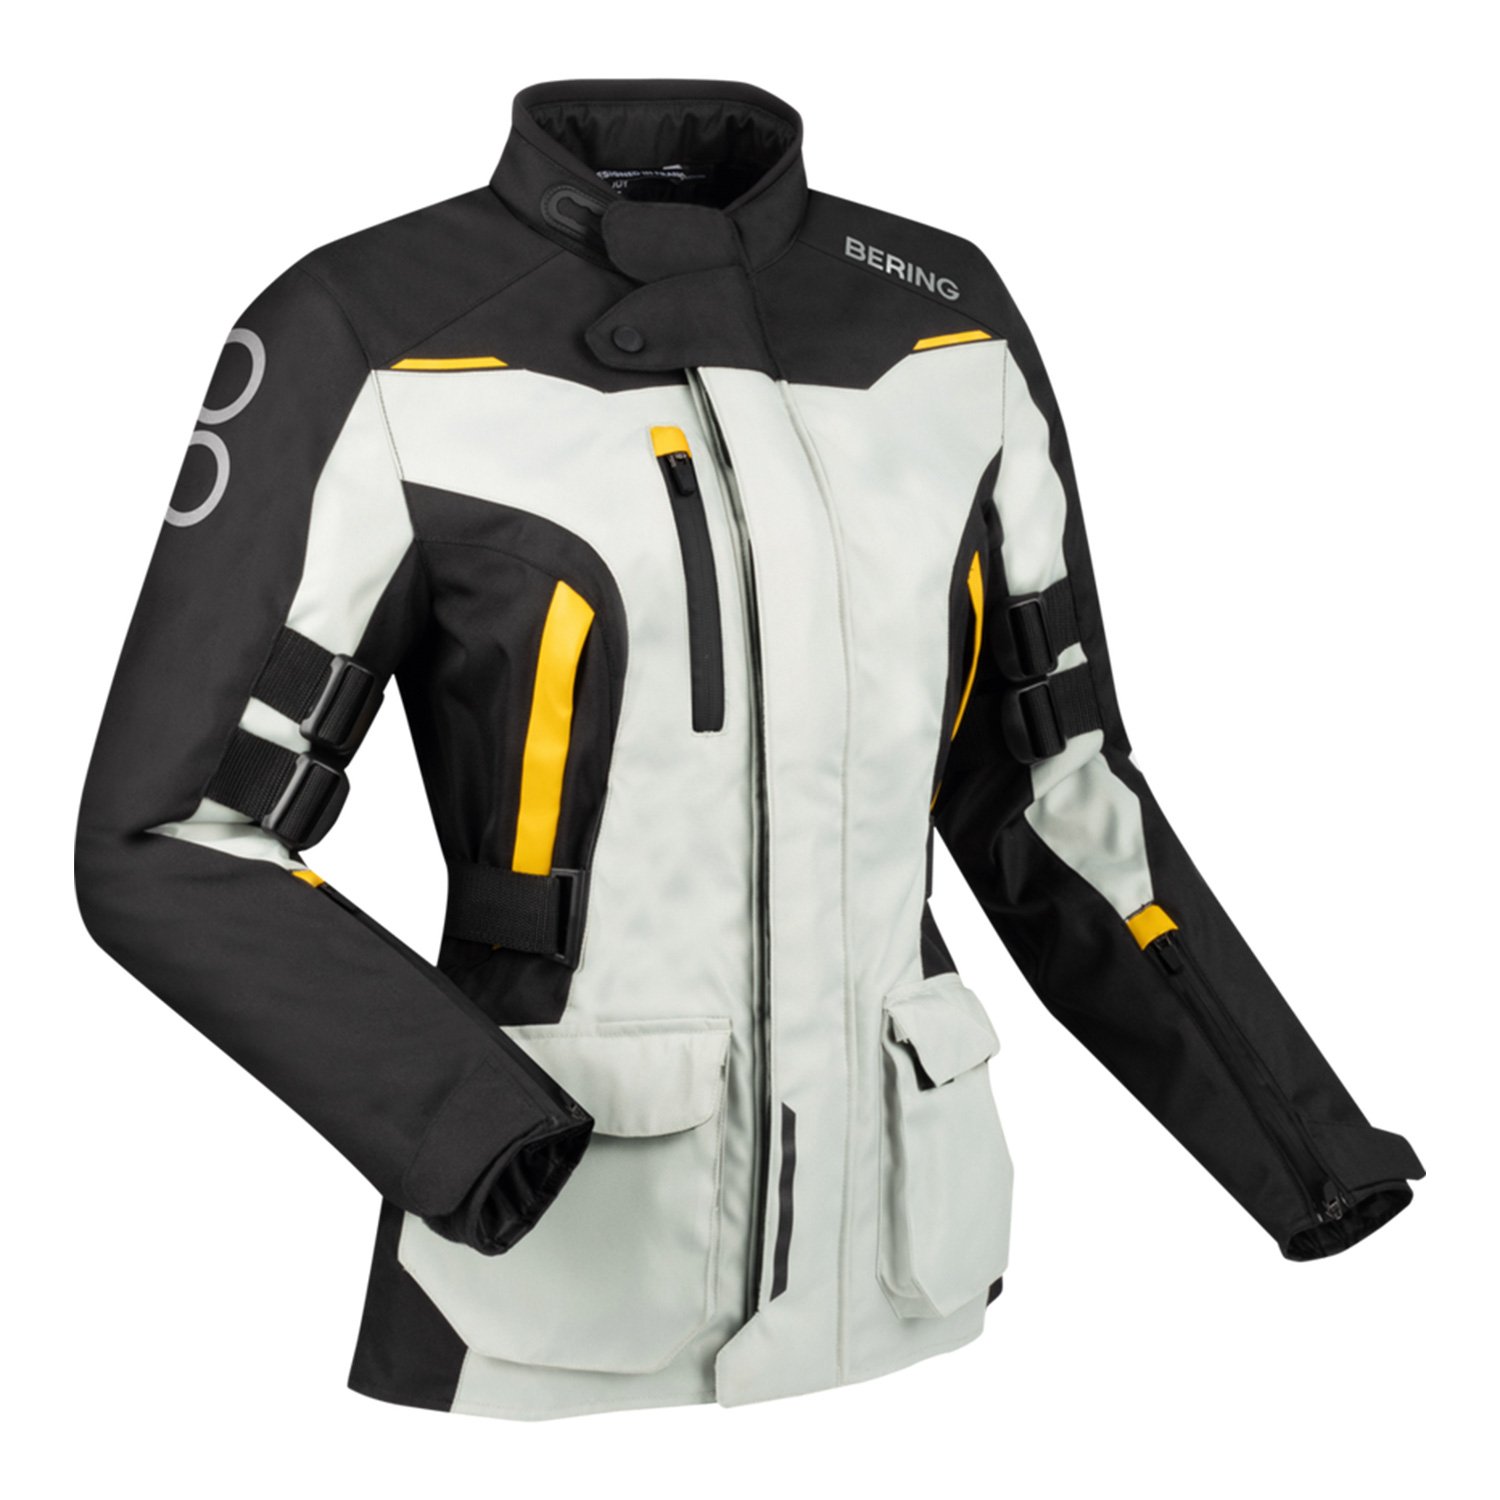 Image of Bering Lady Zephyr Jacket Black Grey Yellow Taille T4